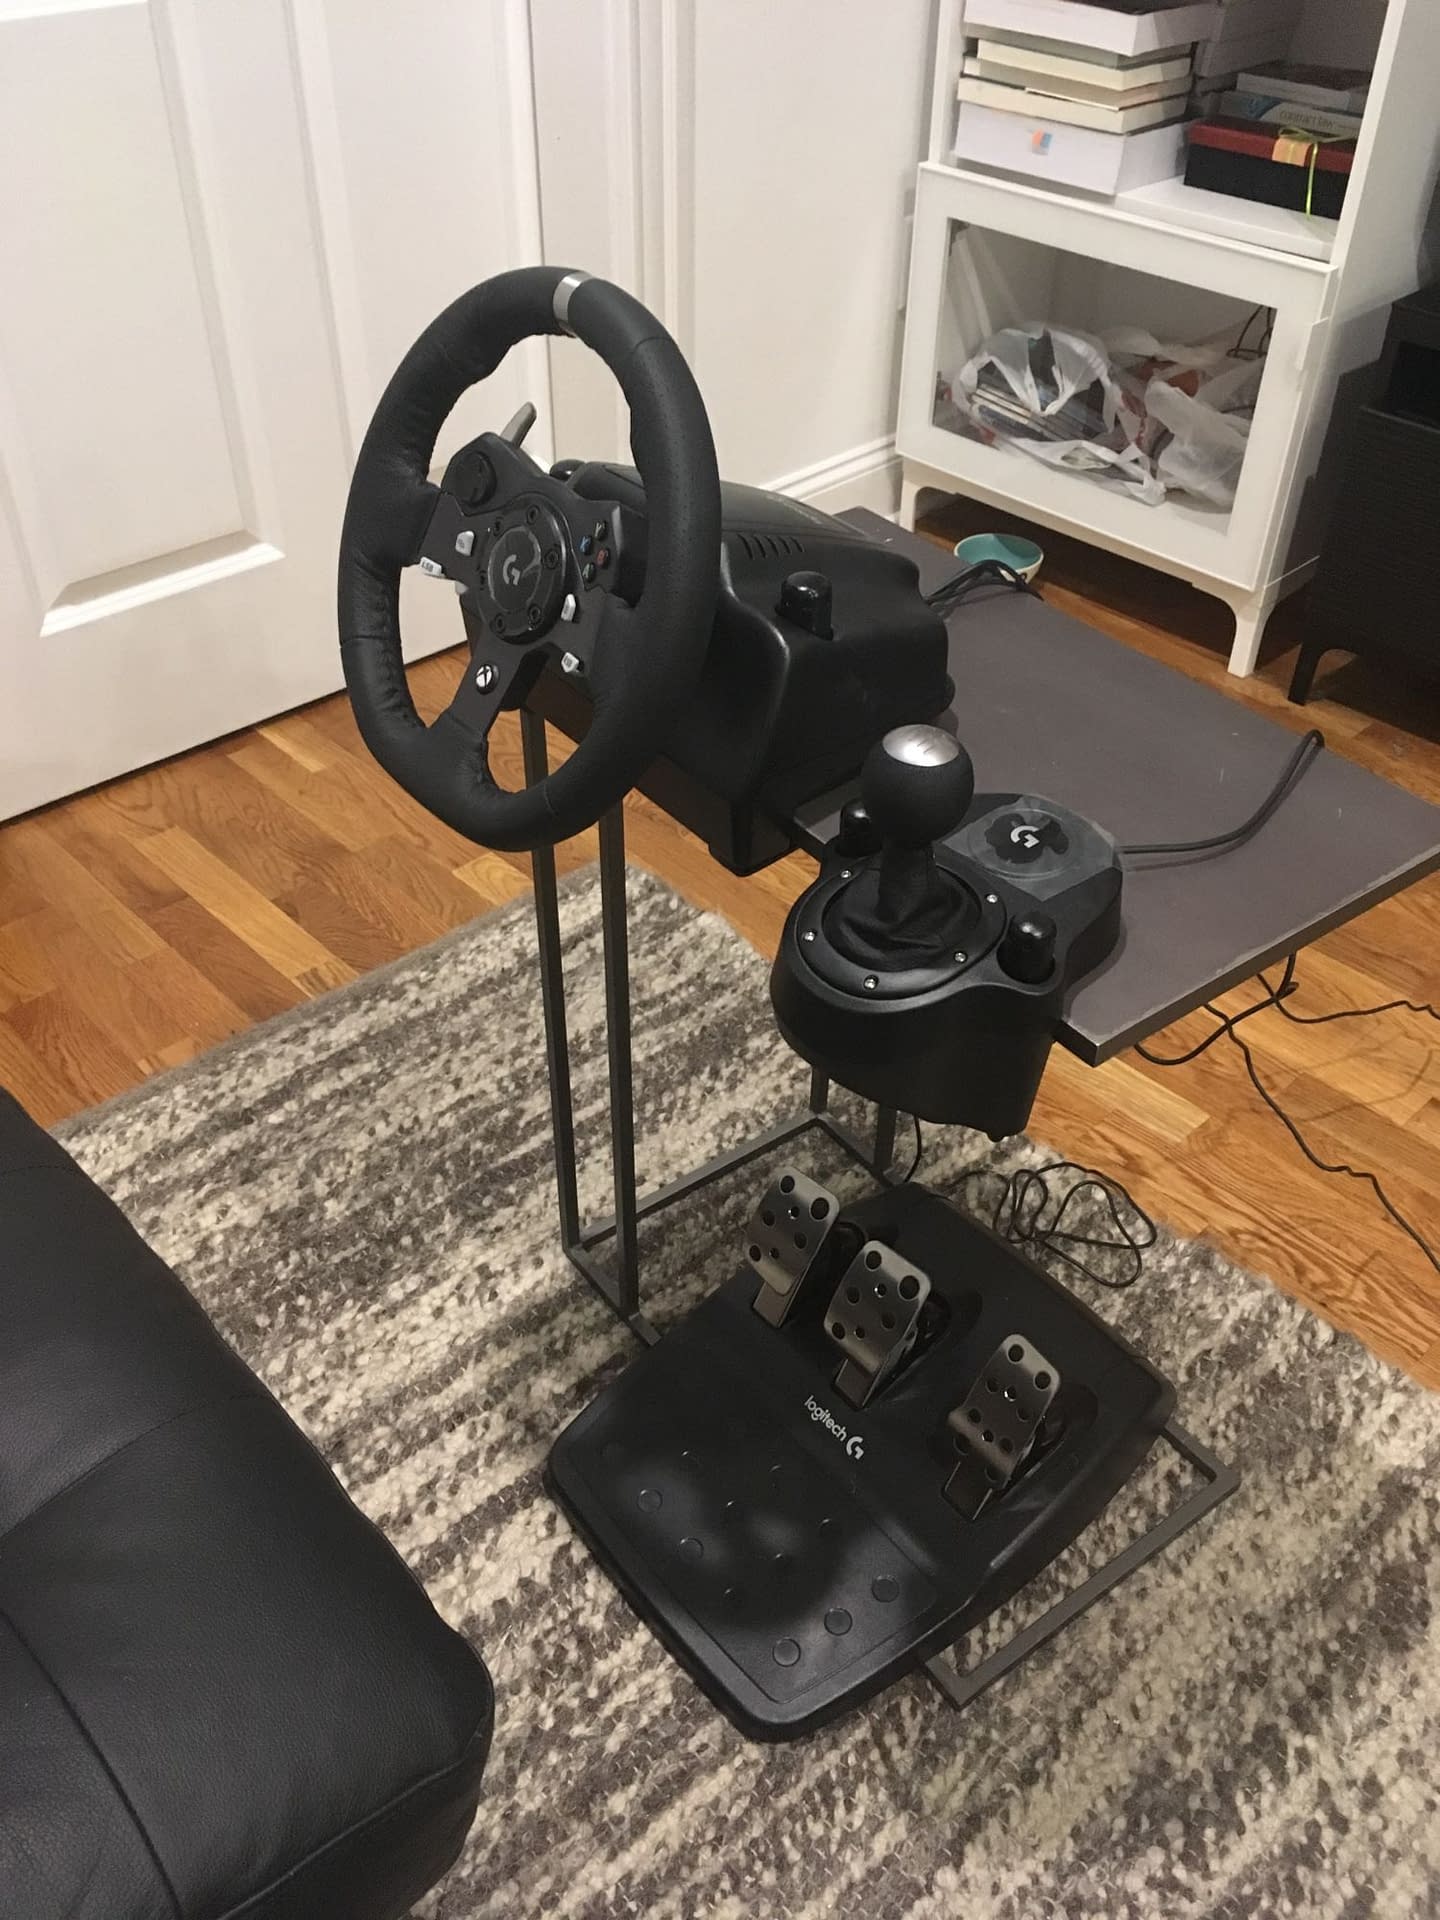  Logitech G29 Driving Force Racing Wheel and Floor